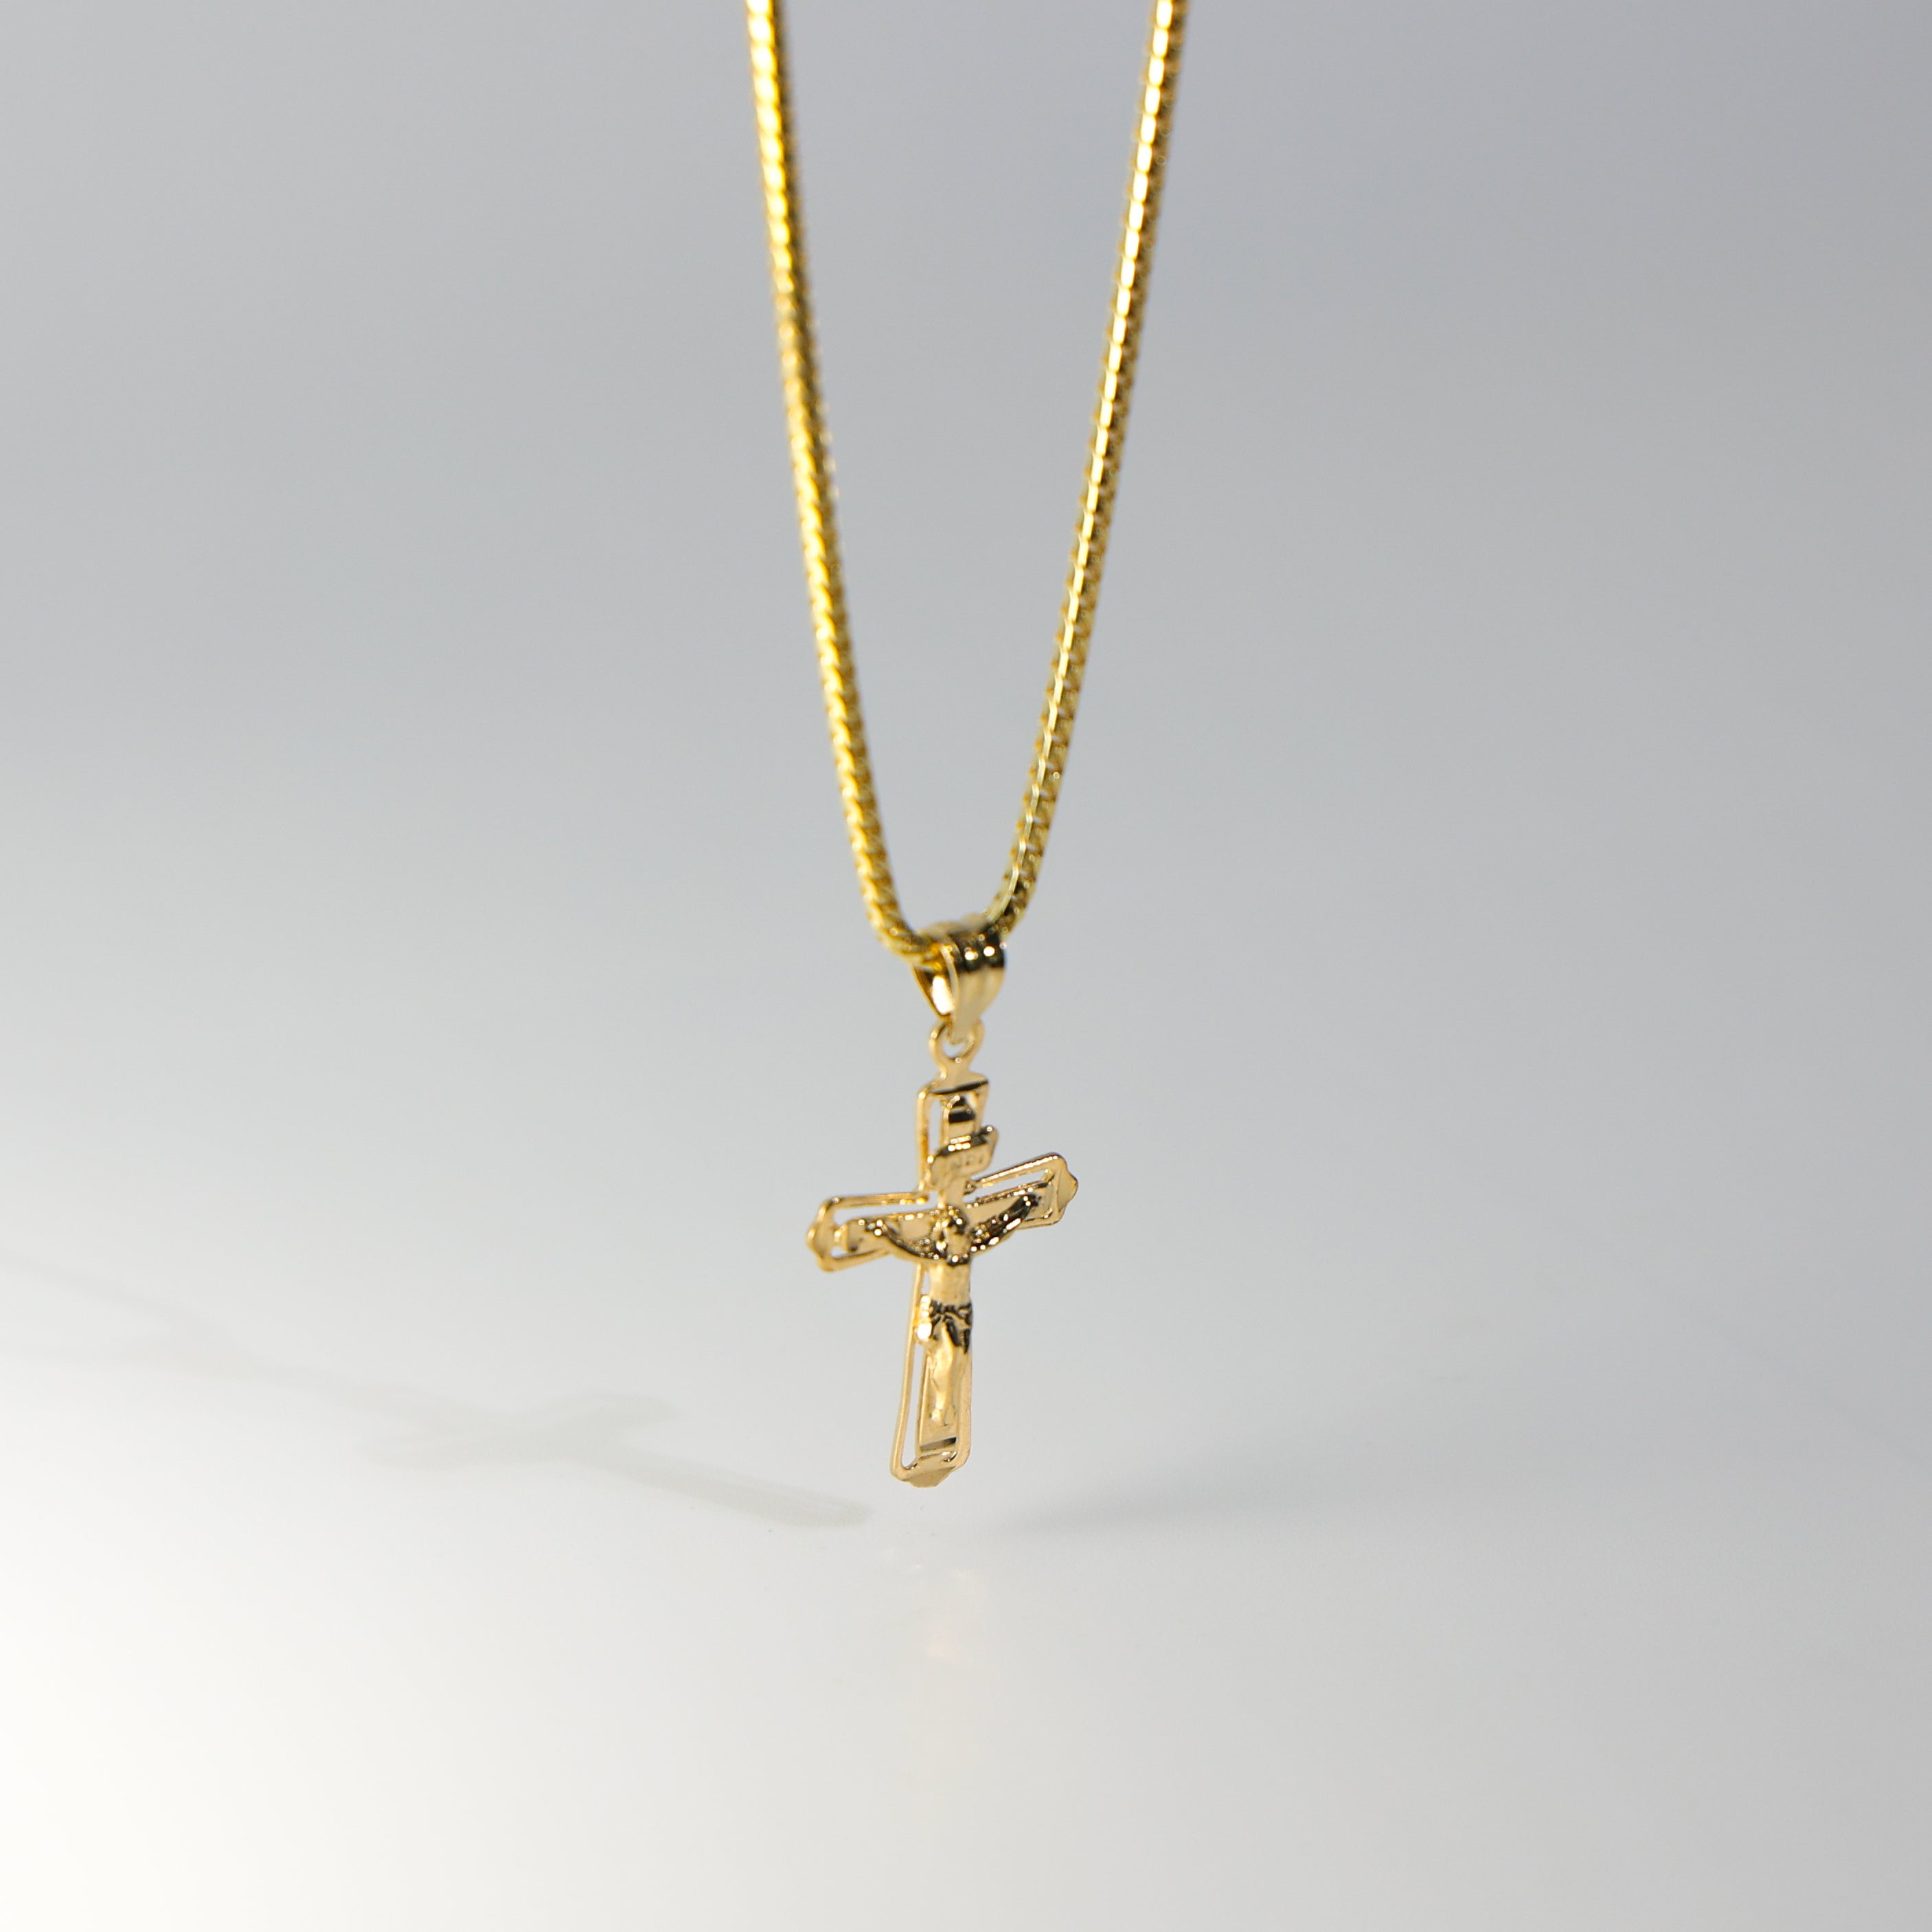 Gold Crucifix Cross Religious Pendant - Charlie & Co. Jewelry